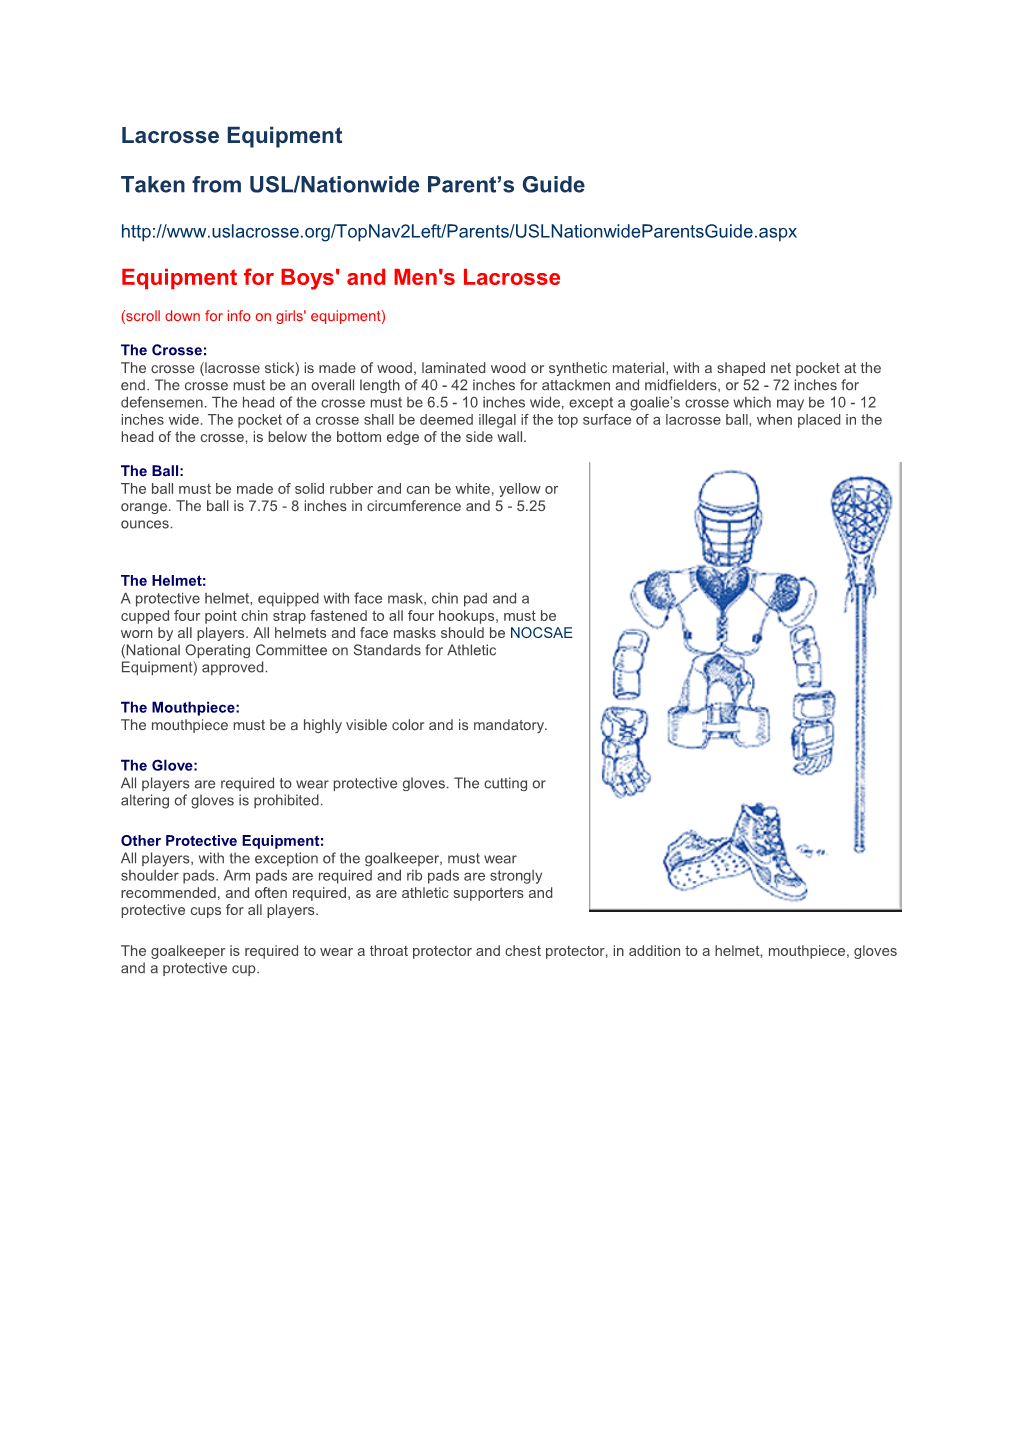 Lacrosse Equipment Taken from USL/Nationwide Parent's Guide